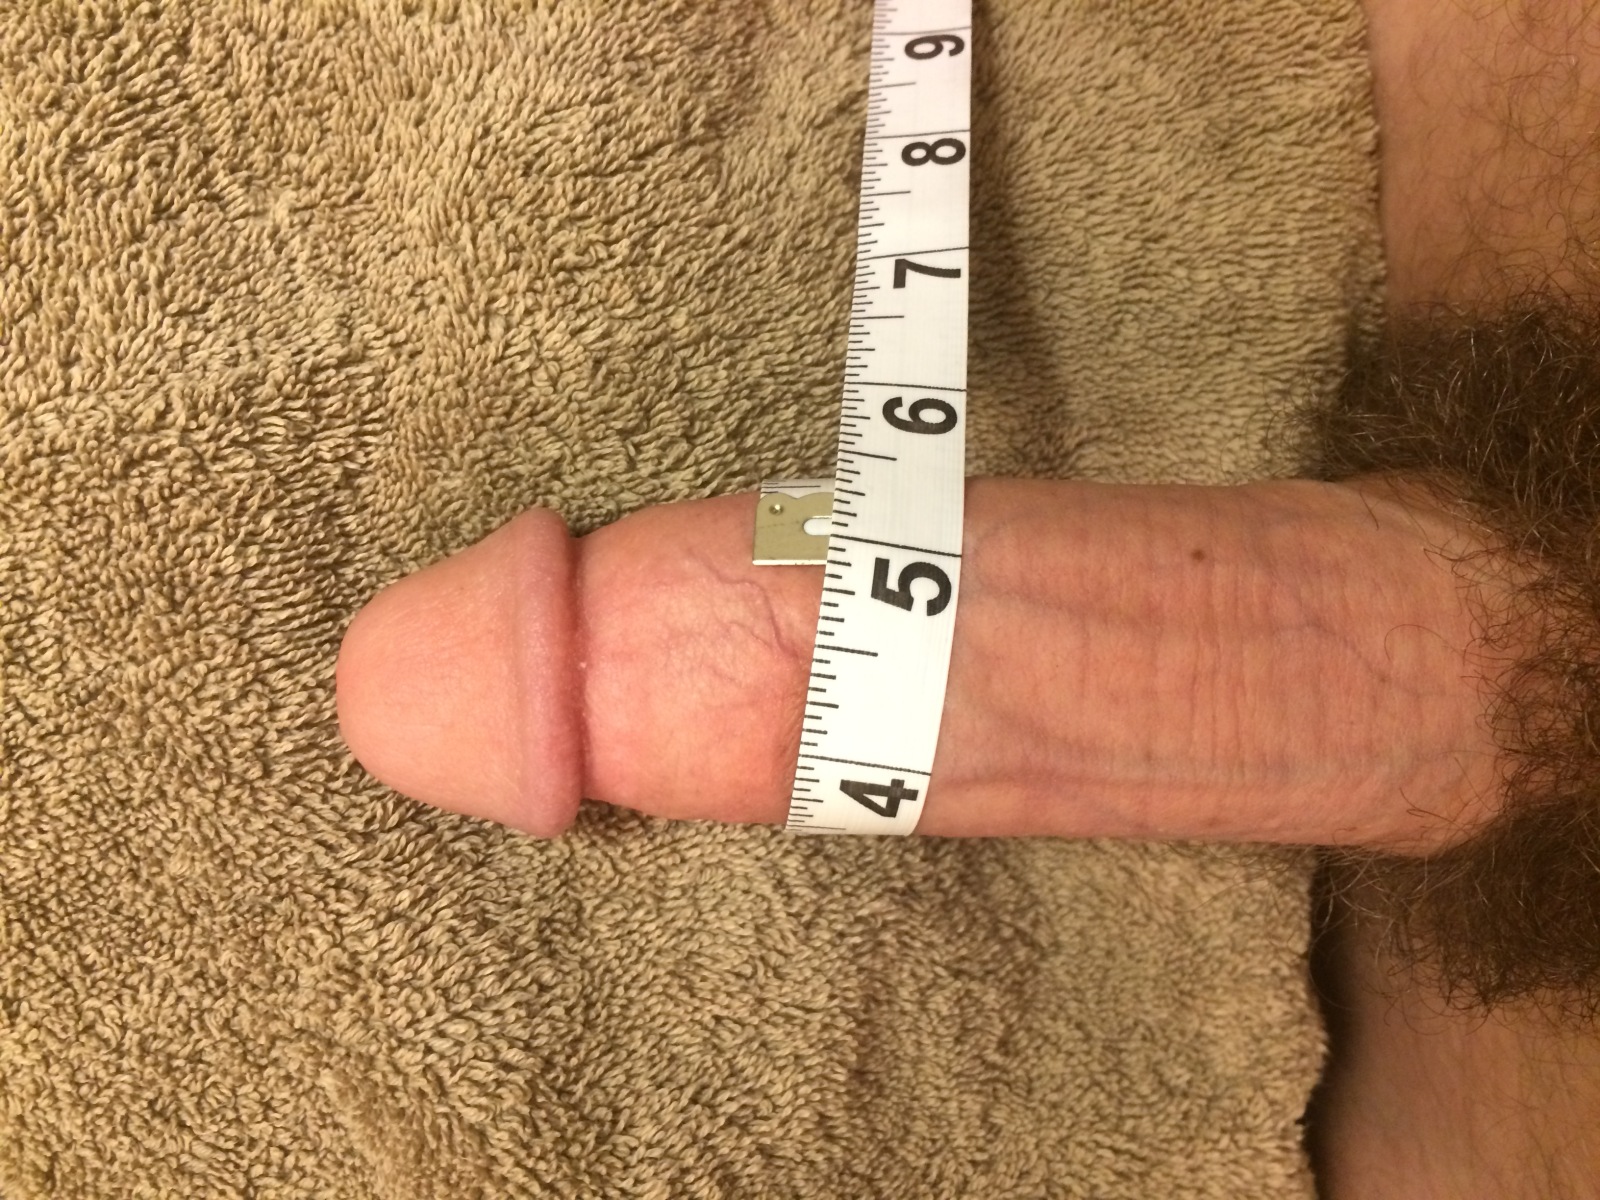 Rate The Girth Of My Dick - Freakden-9534